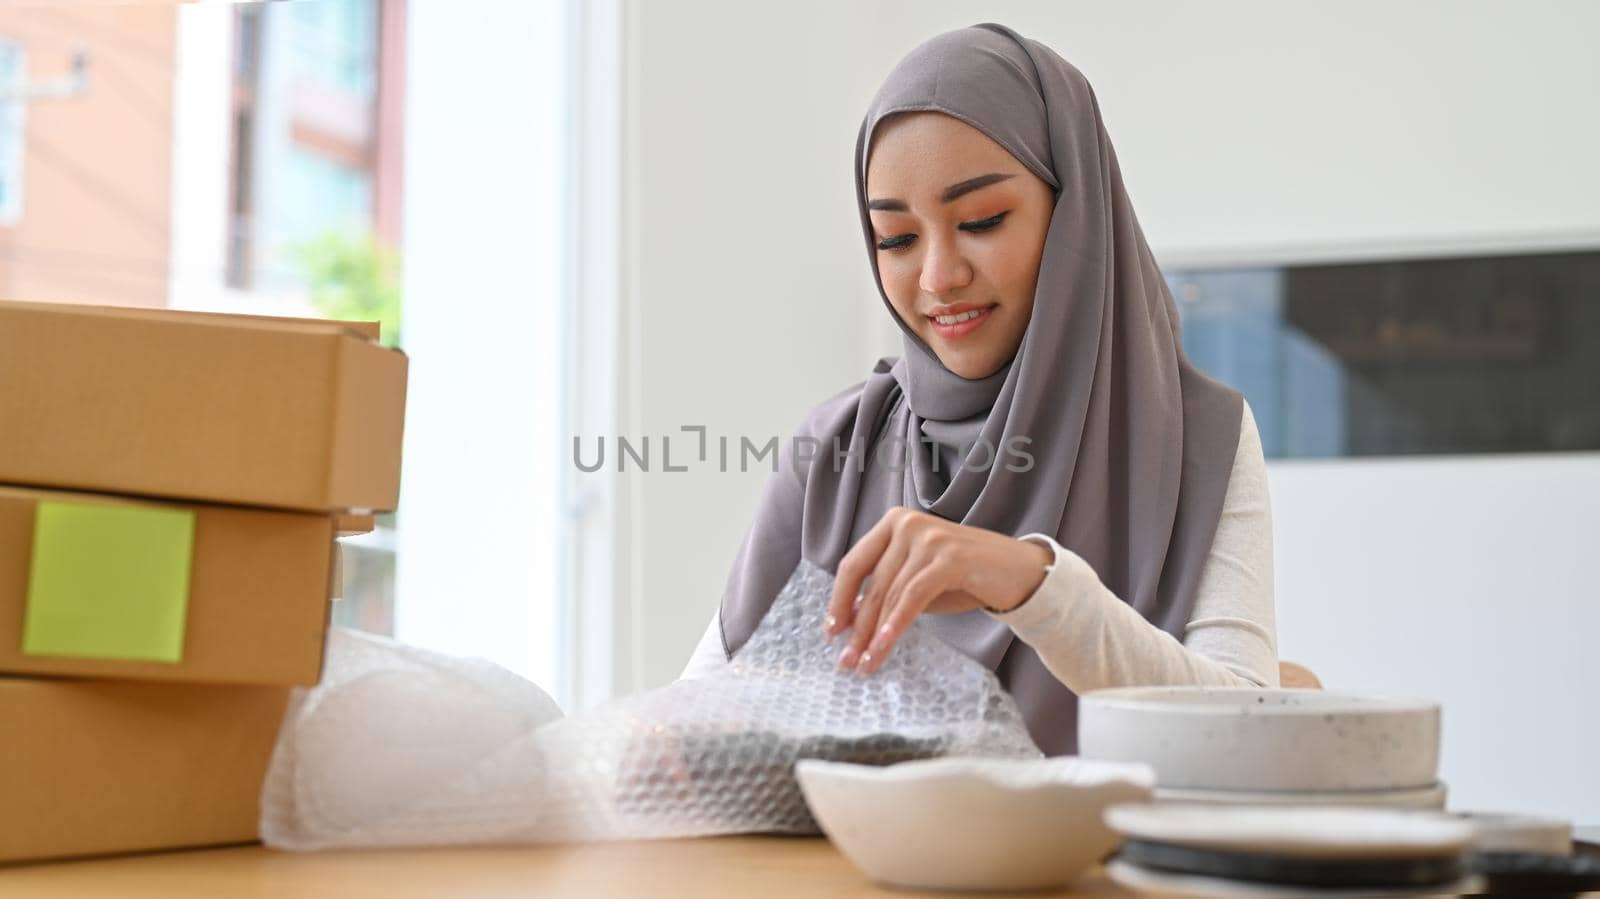 Young asian muslim woman in headscarf preparing packages for delivery to customers. E-commerce, Online selling concept.